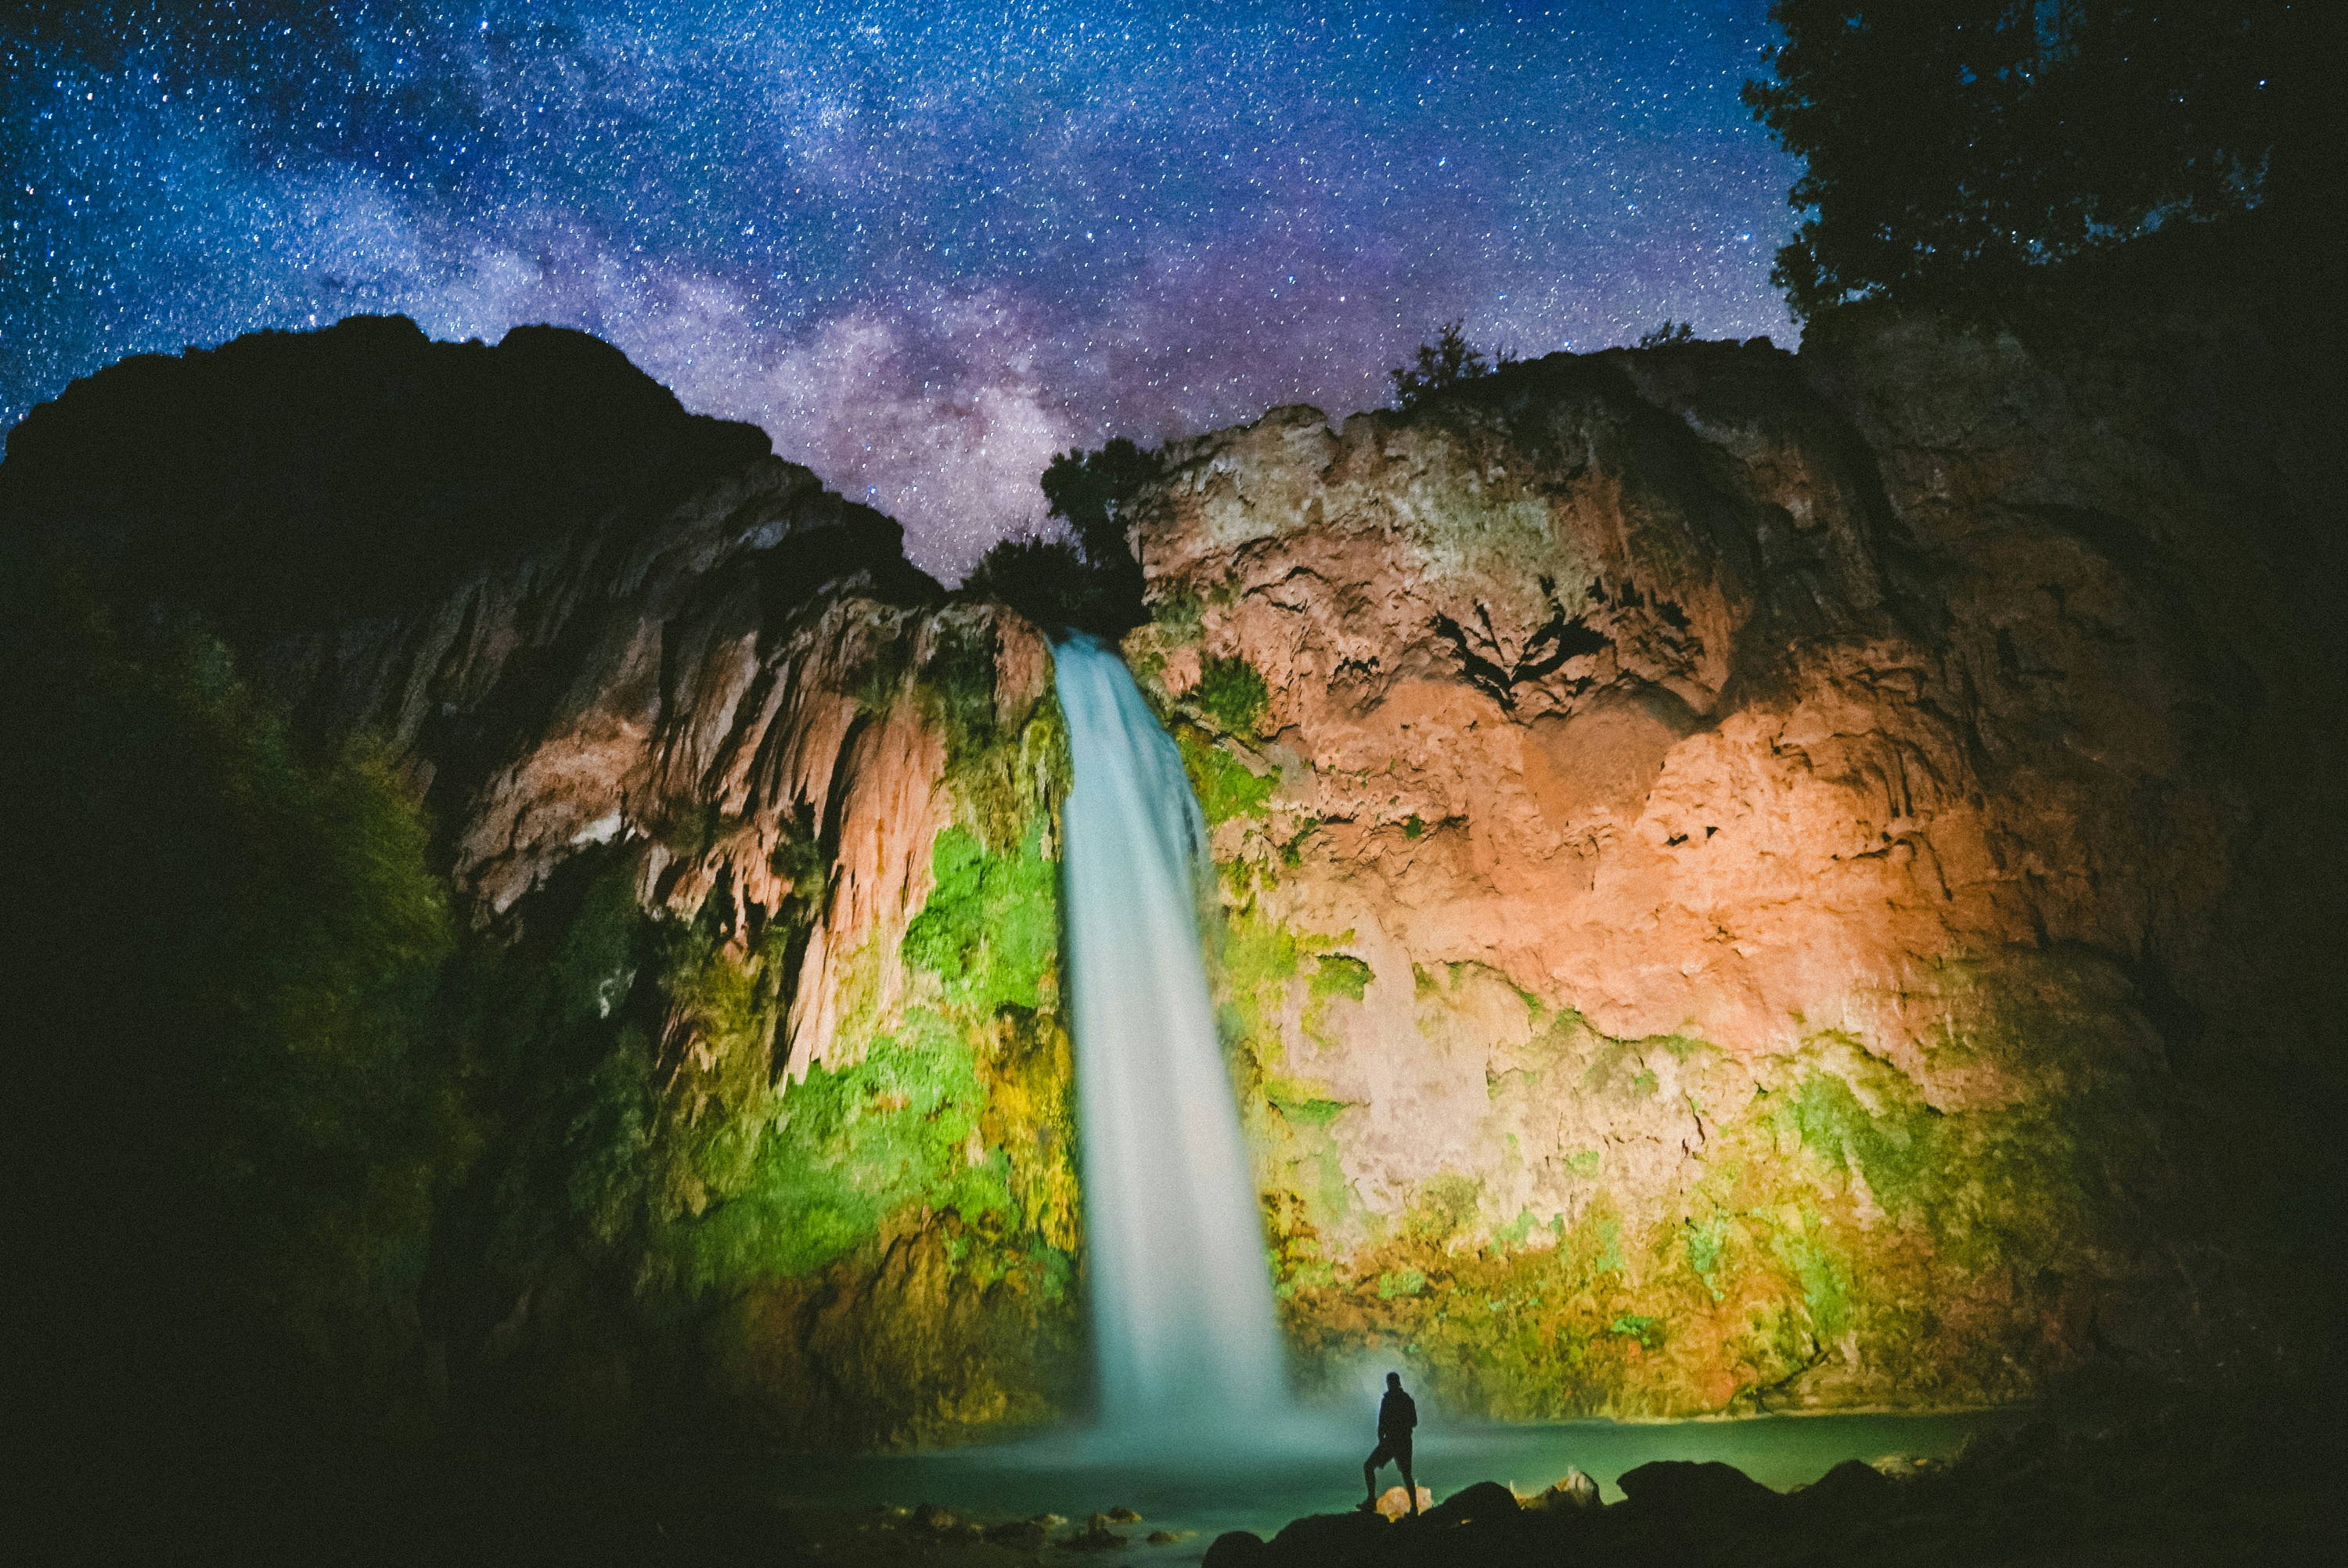 Astrophotography of Grand Canyon National Park night sky & waterfall.